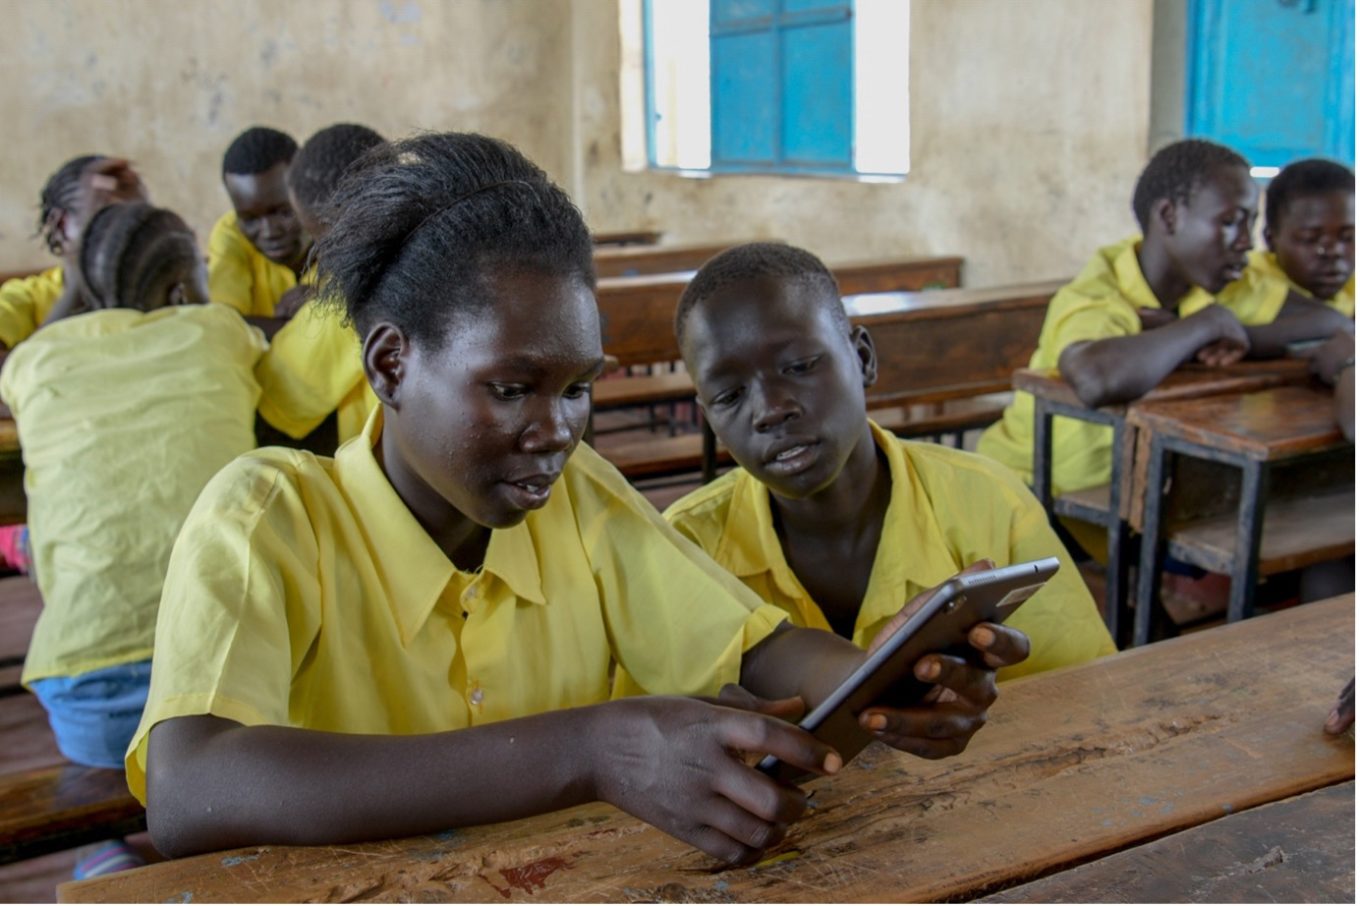 Youth in yellow school uniform sitting at desk looking at smartphone.